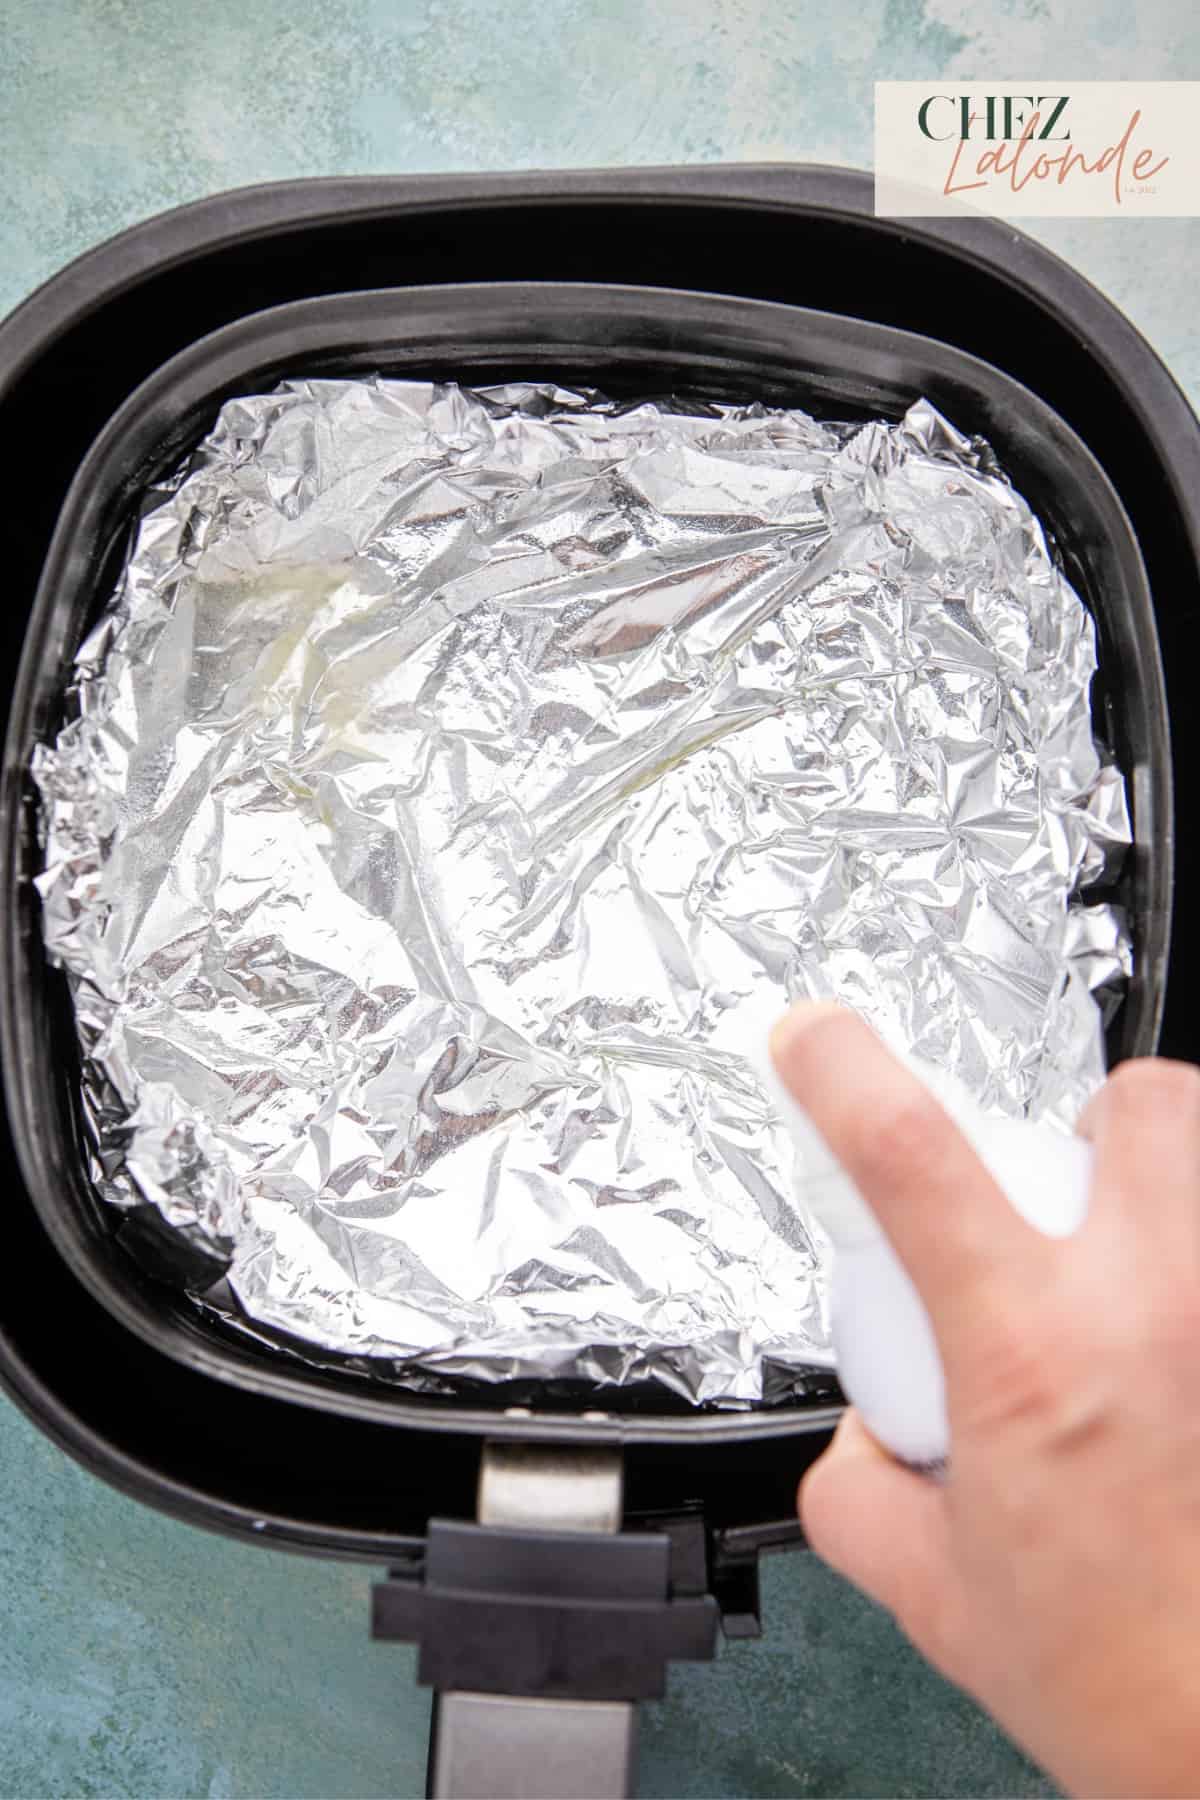 Line the air fryer basket with foil or a silicon air frying liner for easy cleaning.